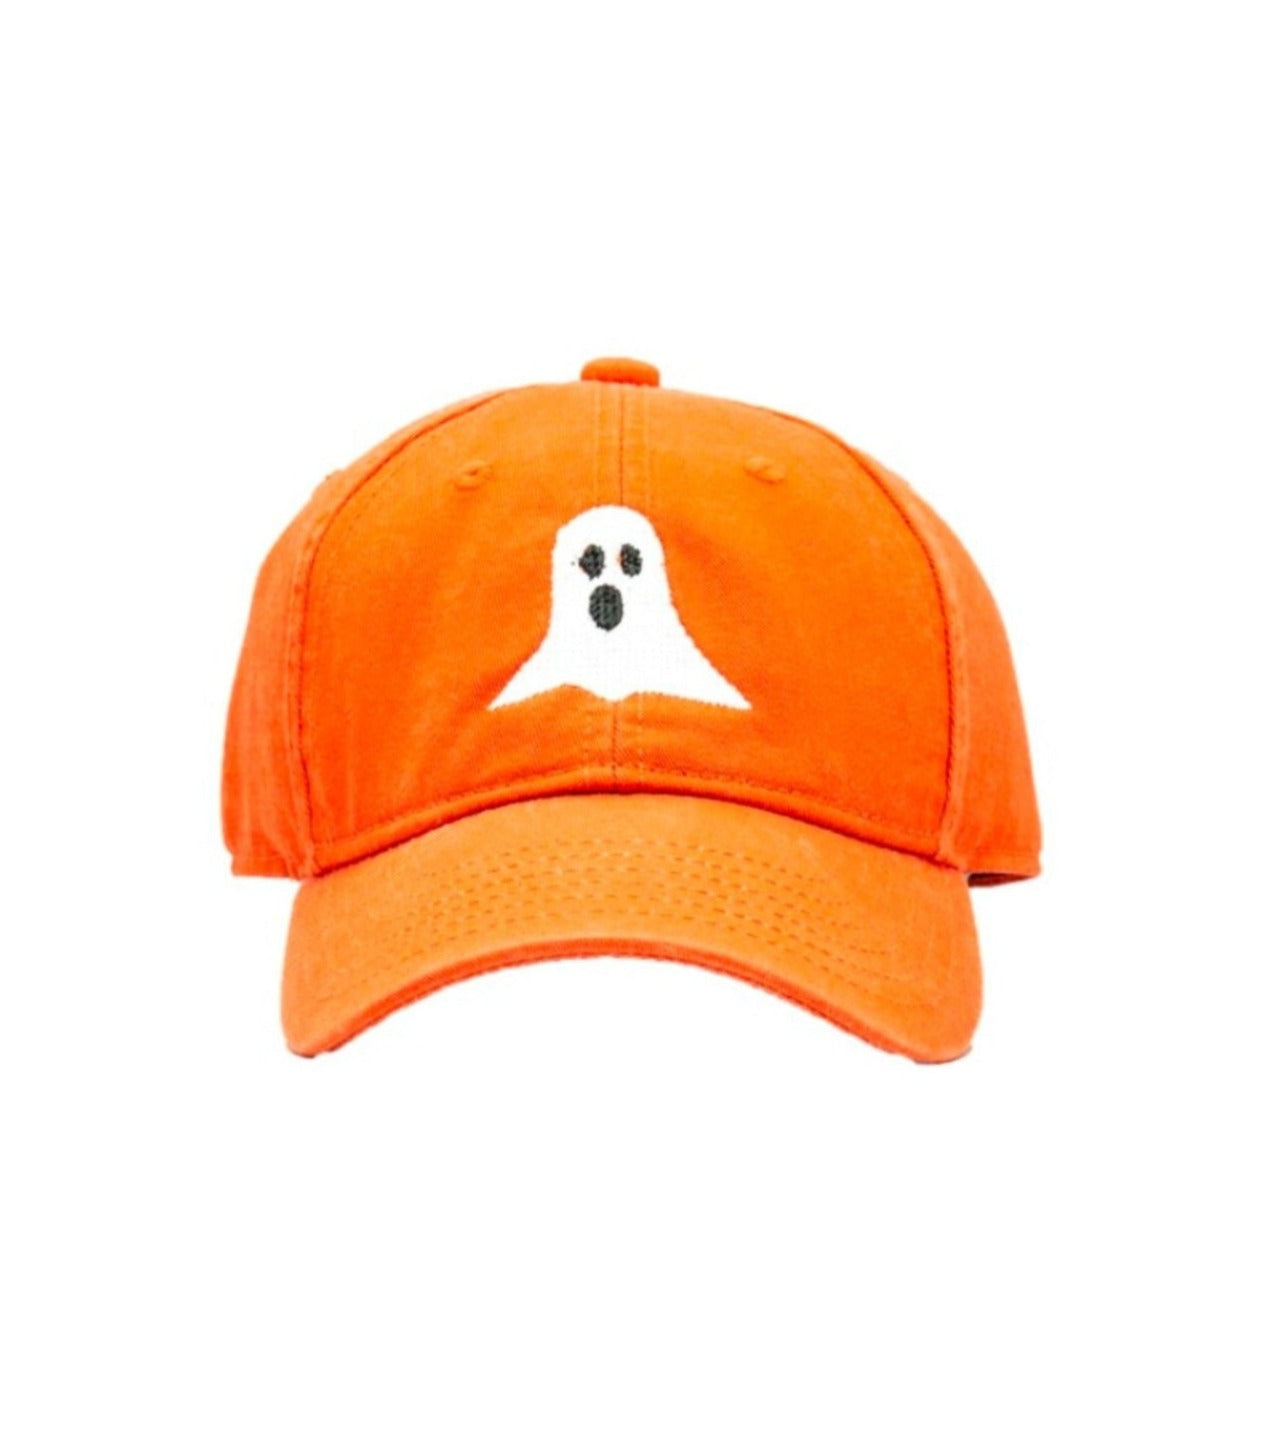 orange baseball hat with white ghost embroidered